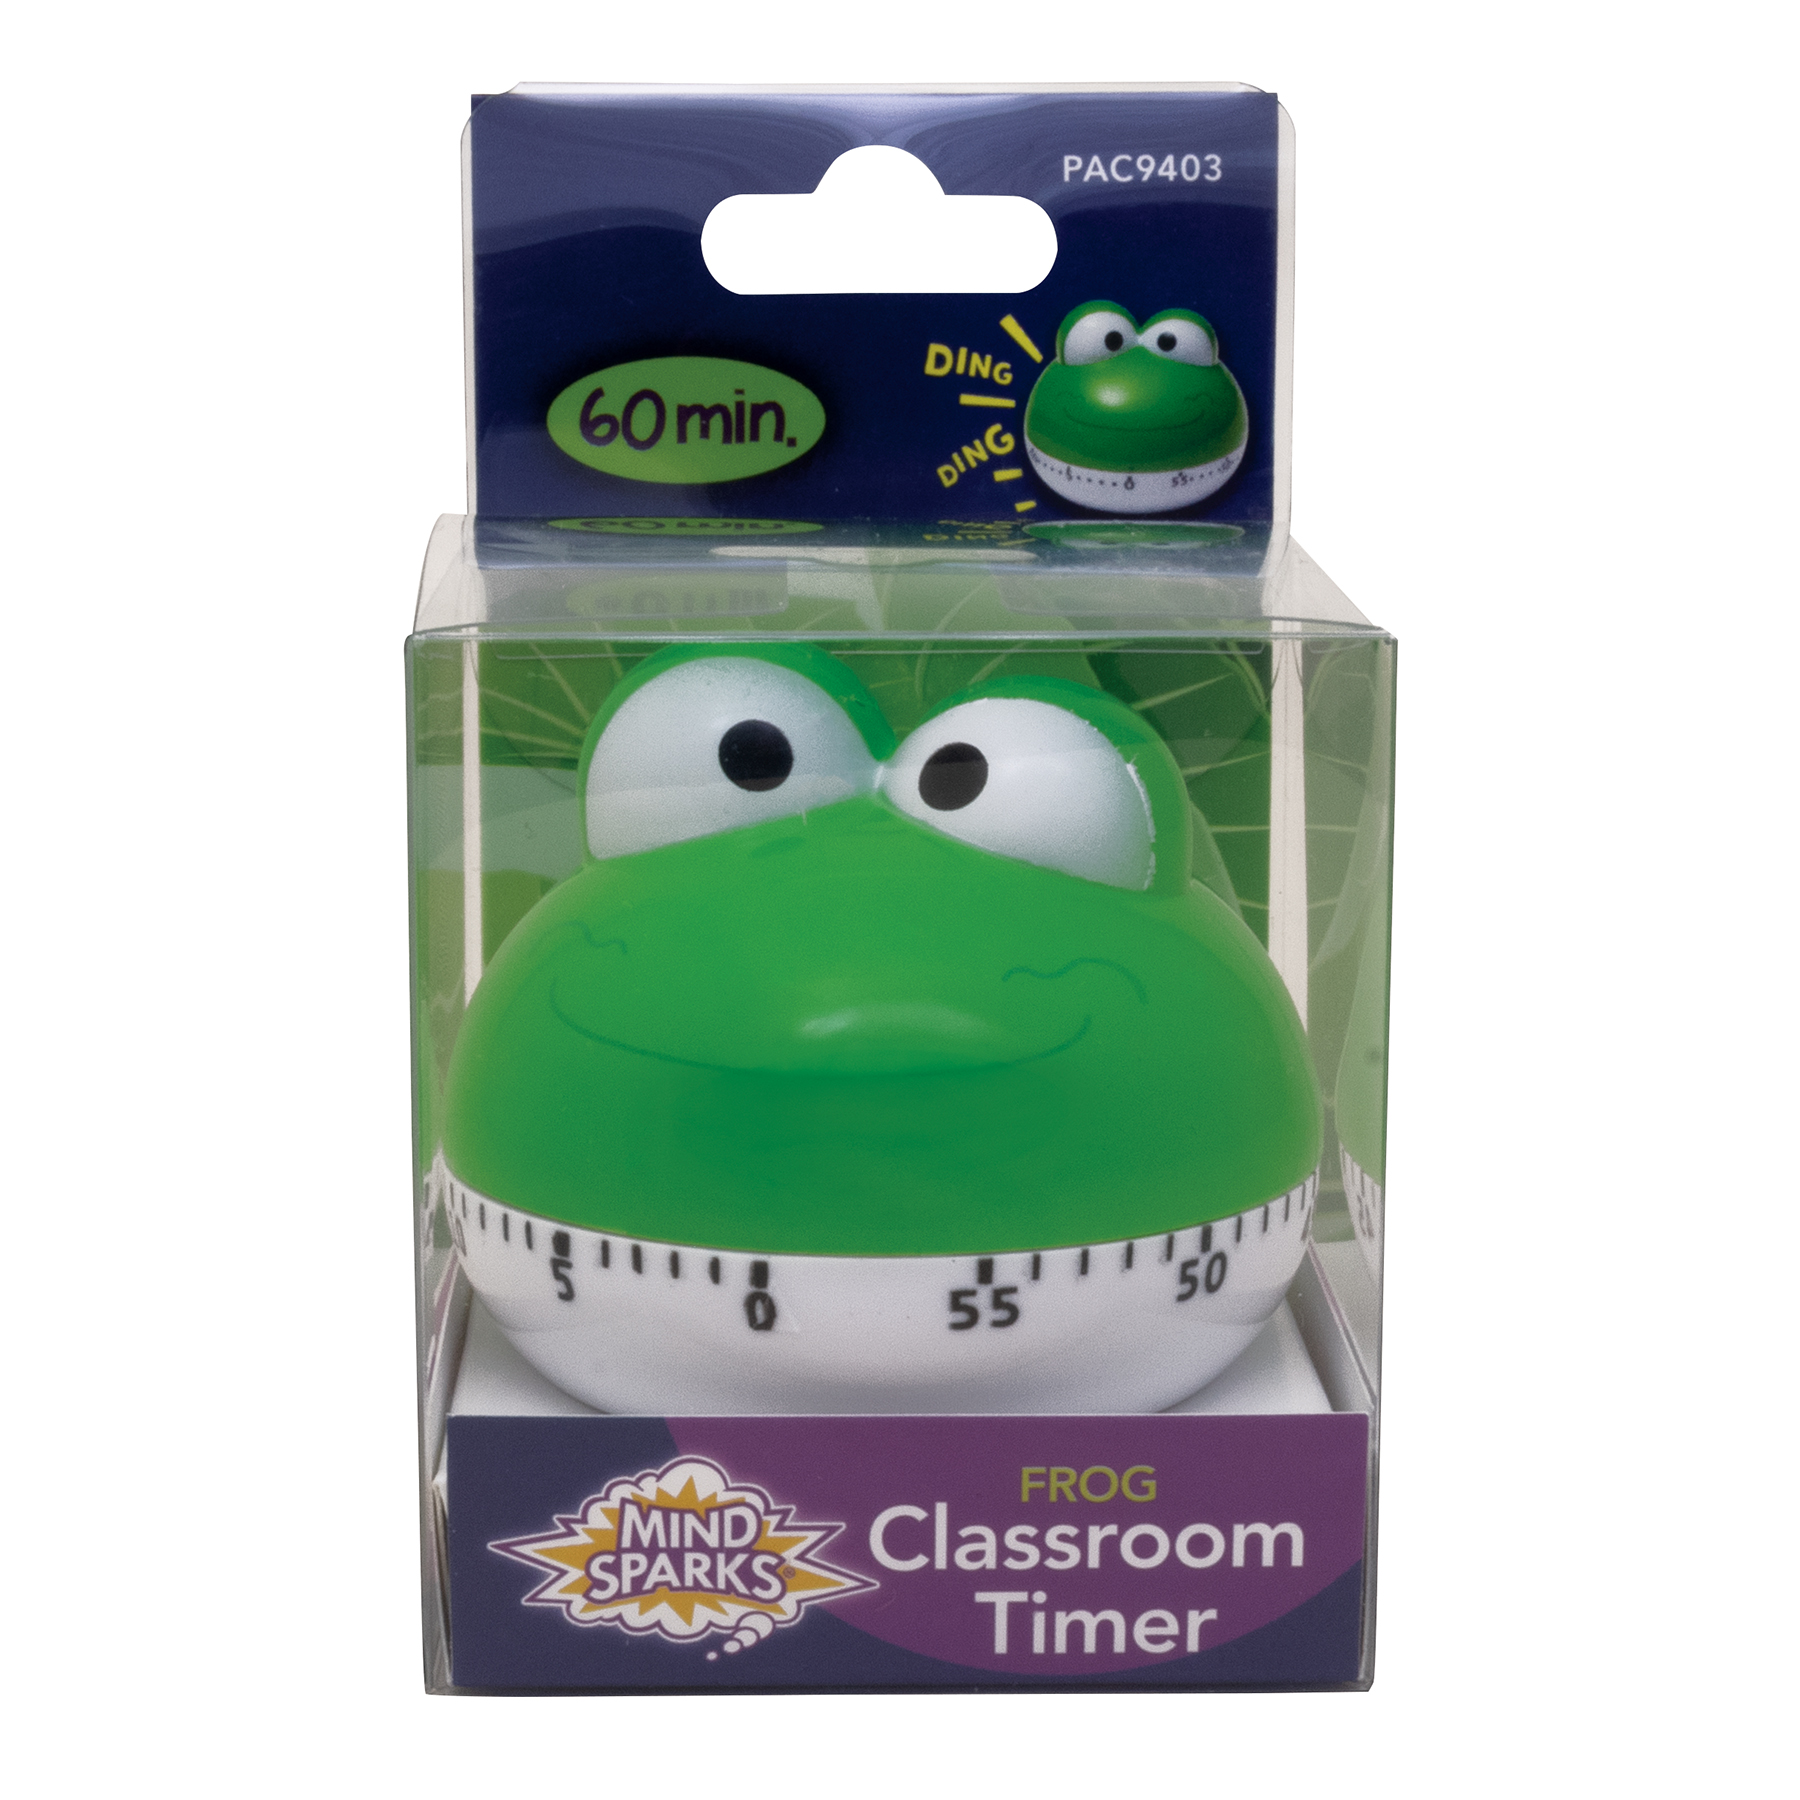 Classroom Timers - Fun Timers